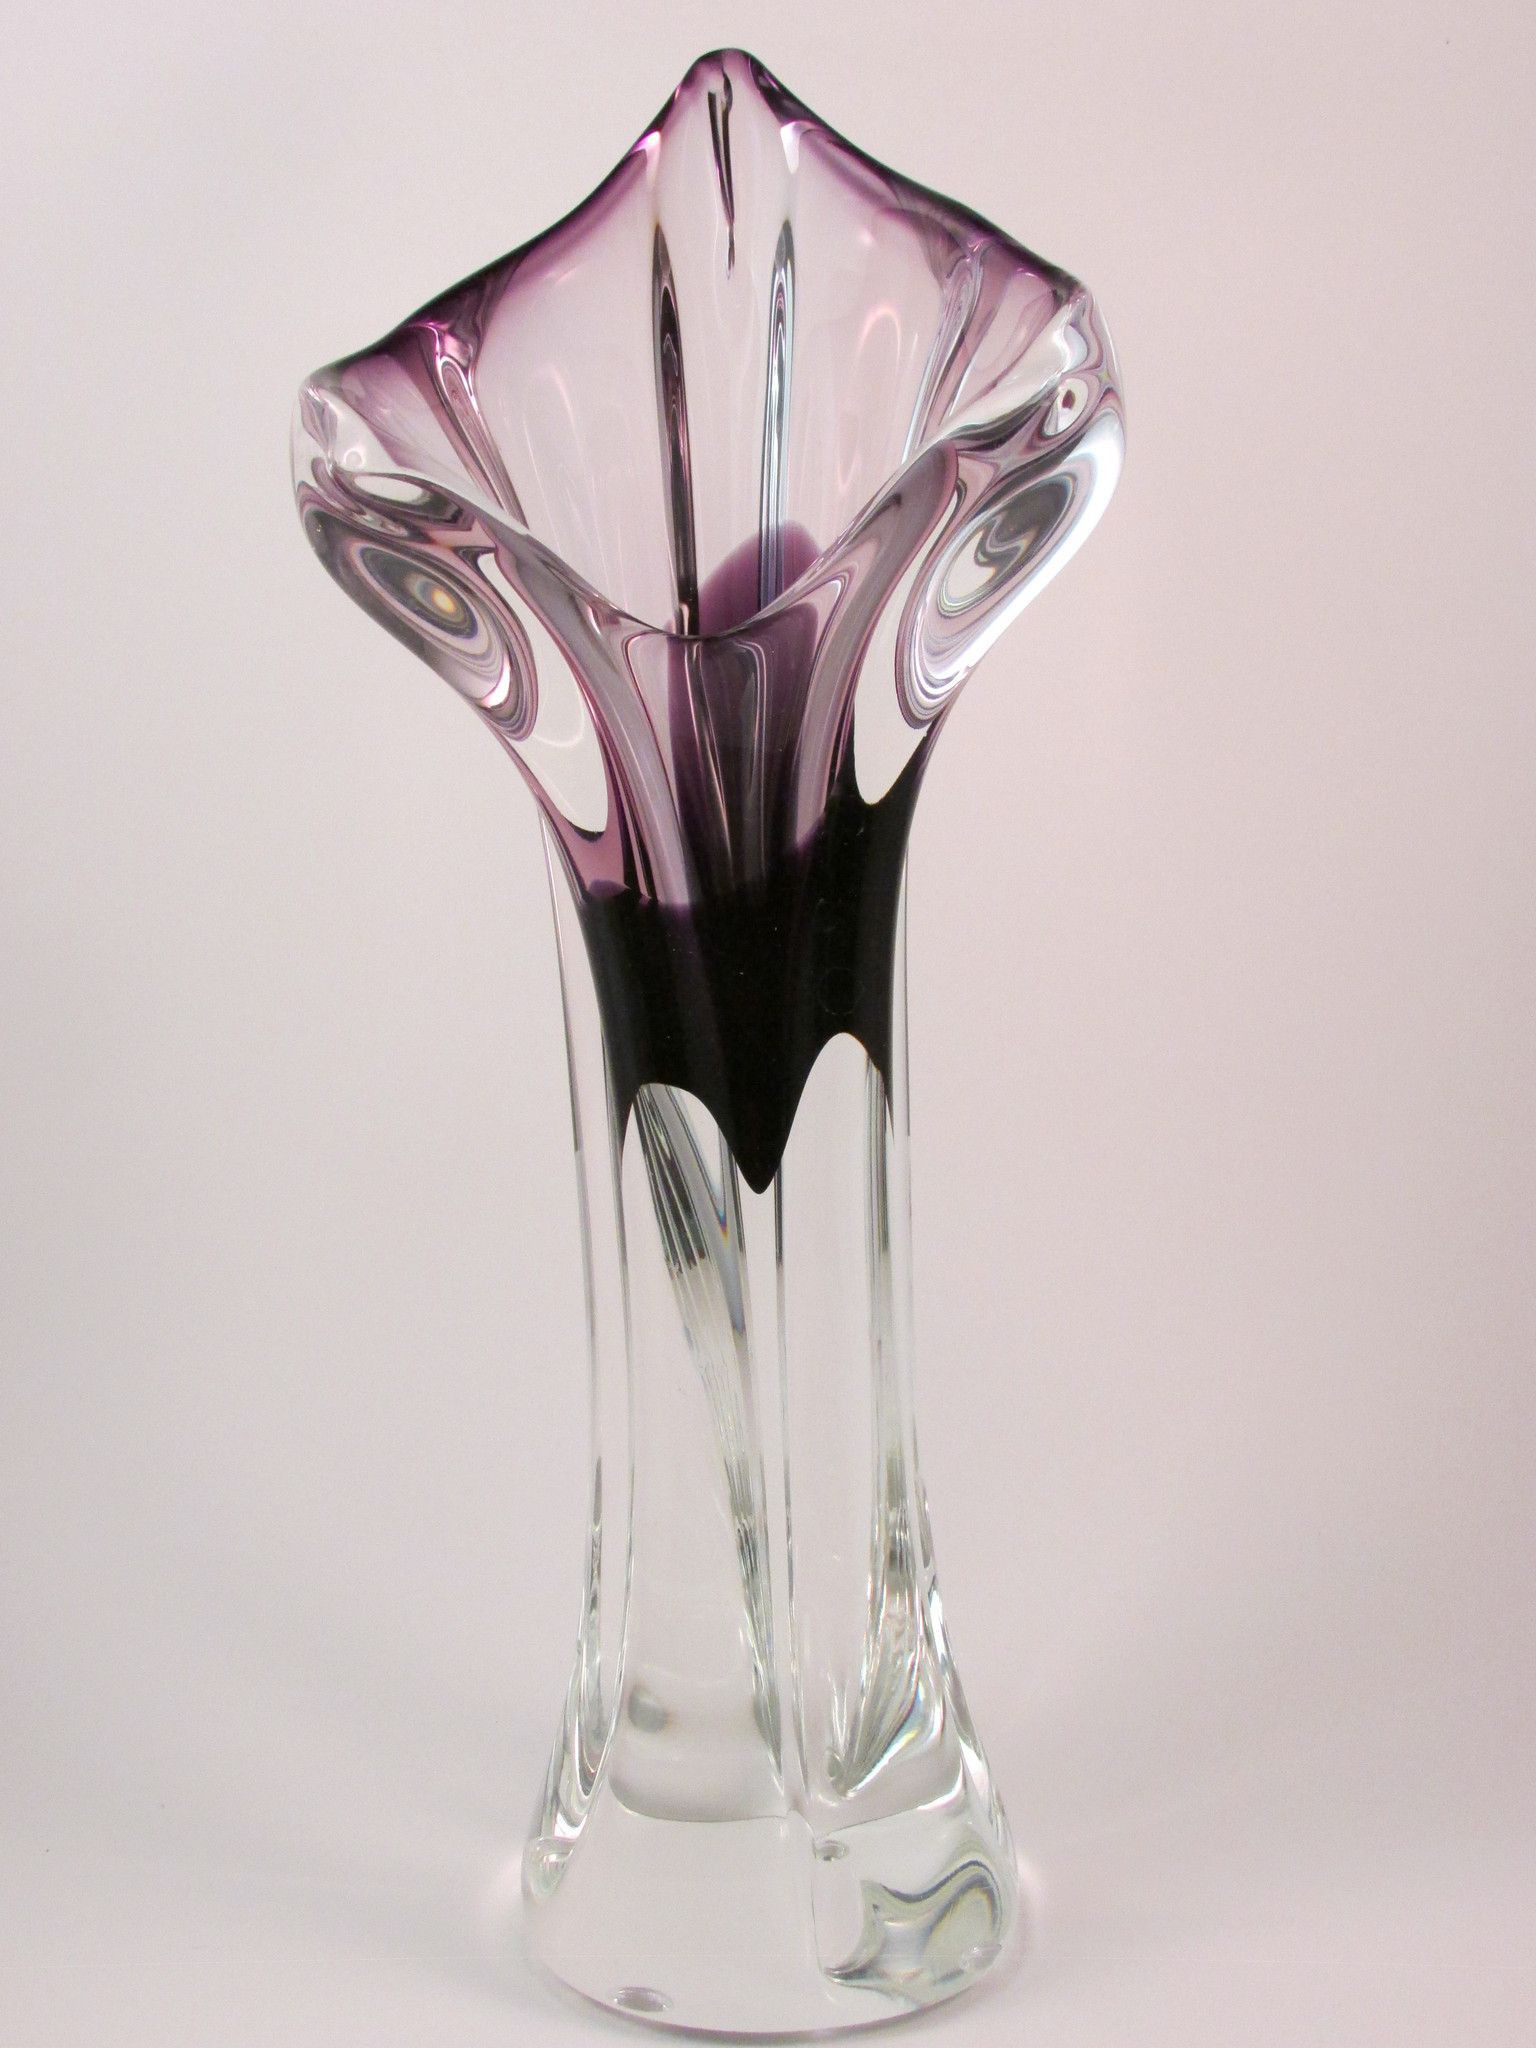 clear glass bud vases of tall purple and clear glass vase jack in the pulpit style clear with regard to tall purple and clear glass vase jack in the pulpit style